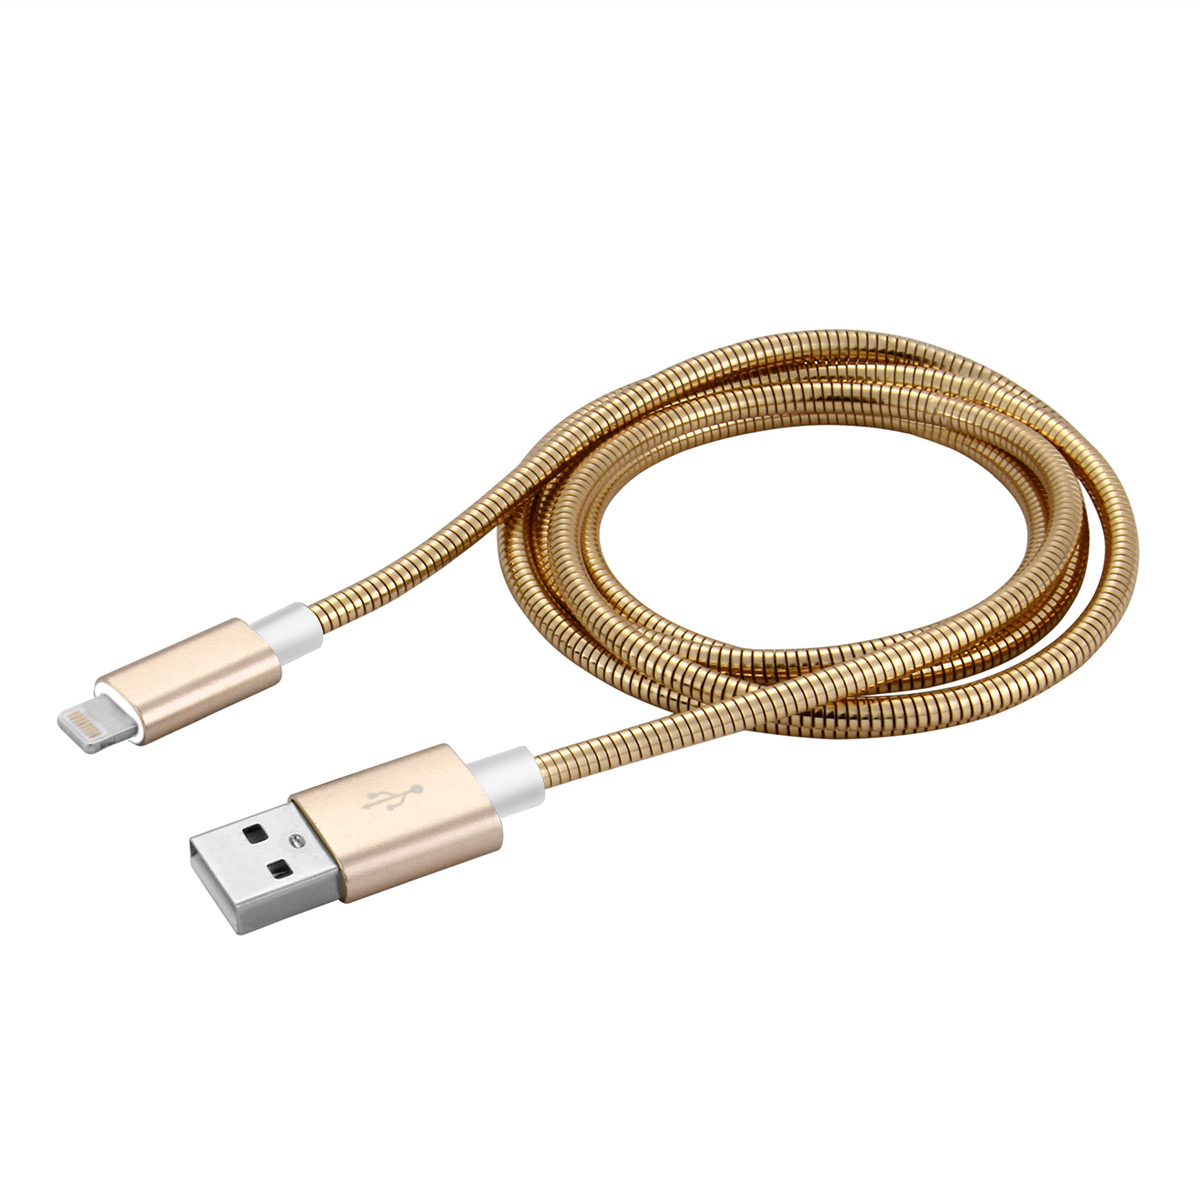 Metal Stainless Steel Spring Woven 8 pin Charging Data Cable for iOS Devices - Gold